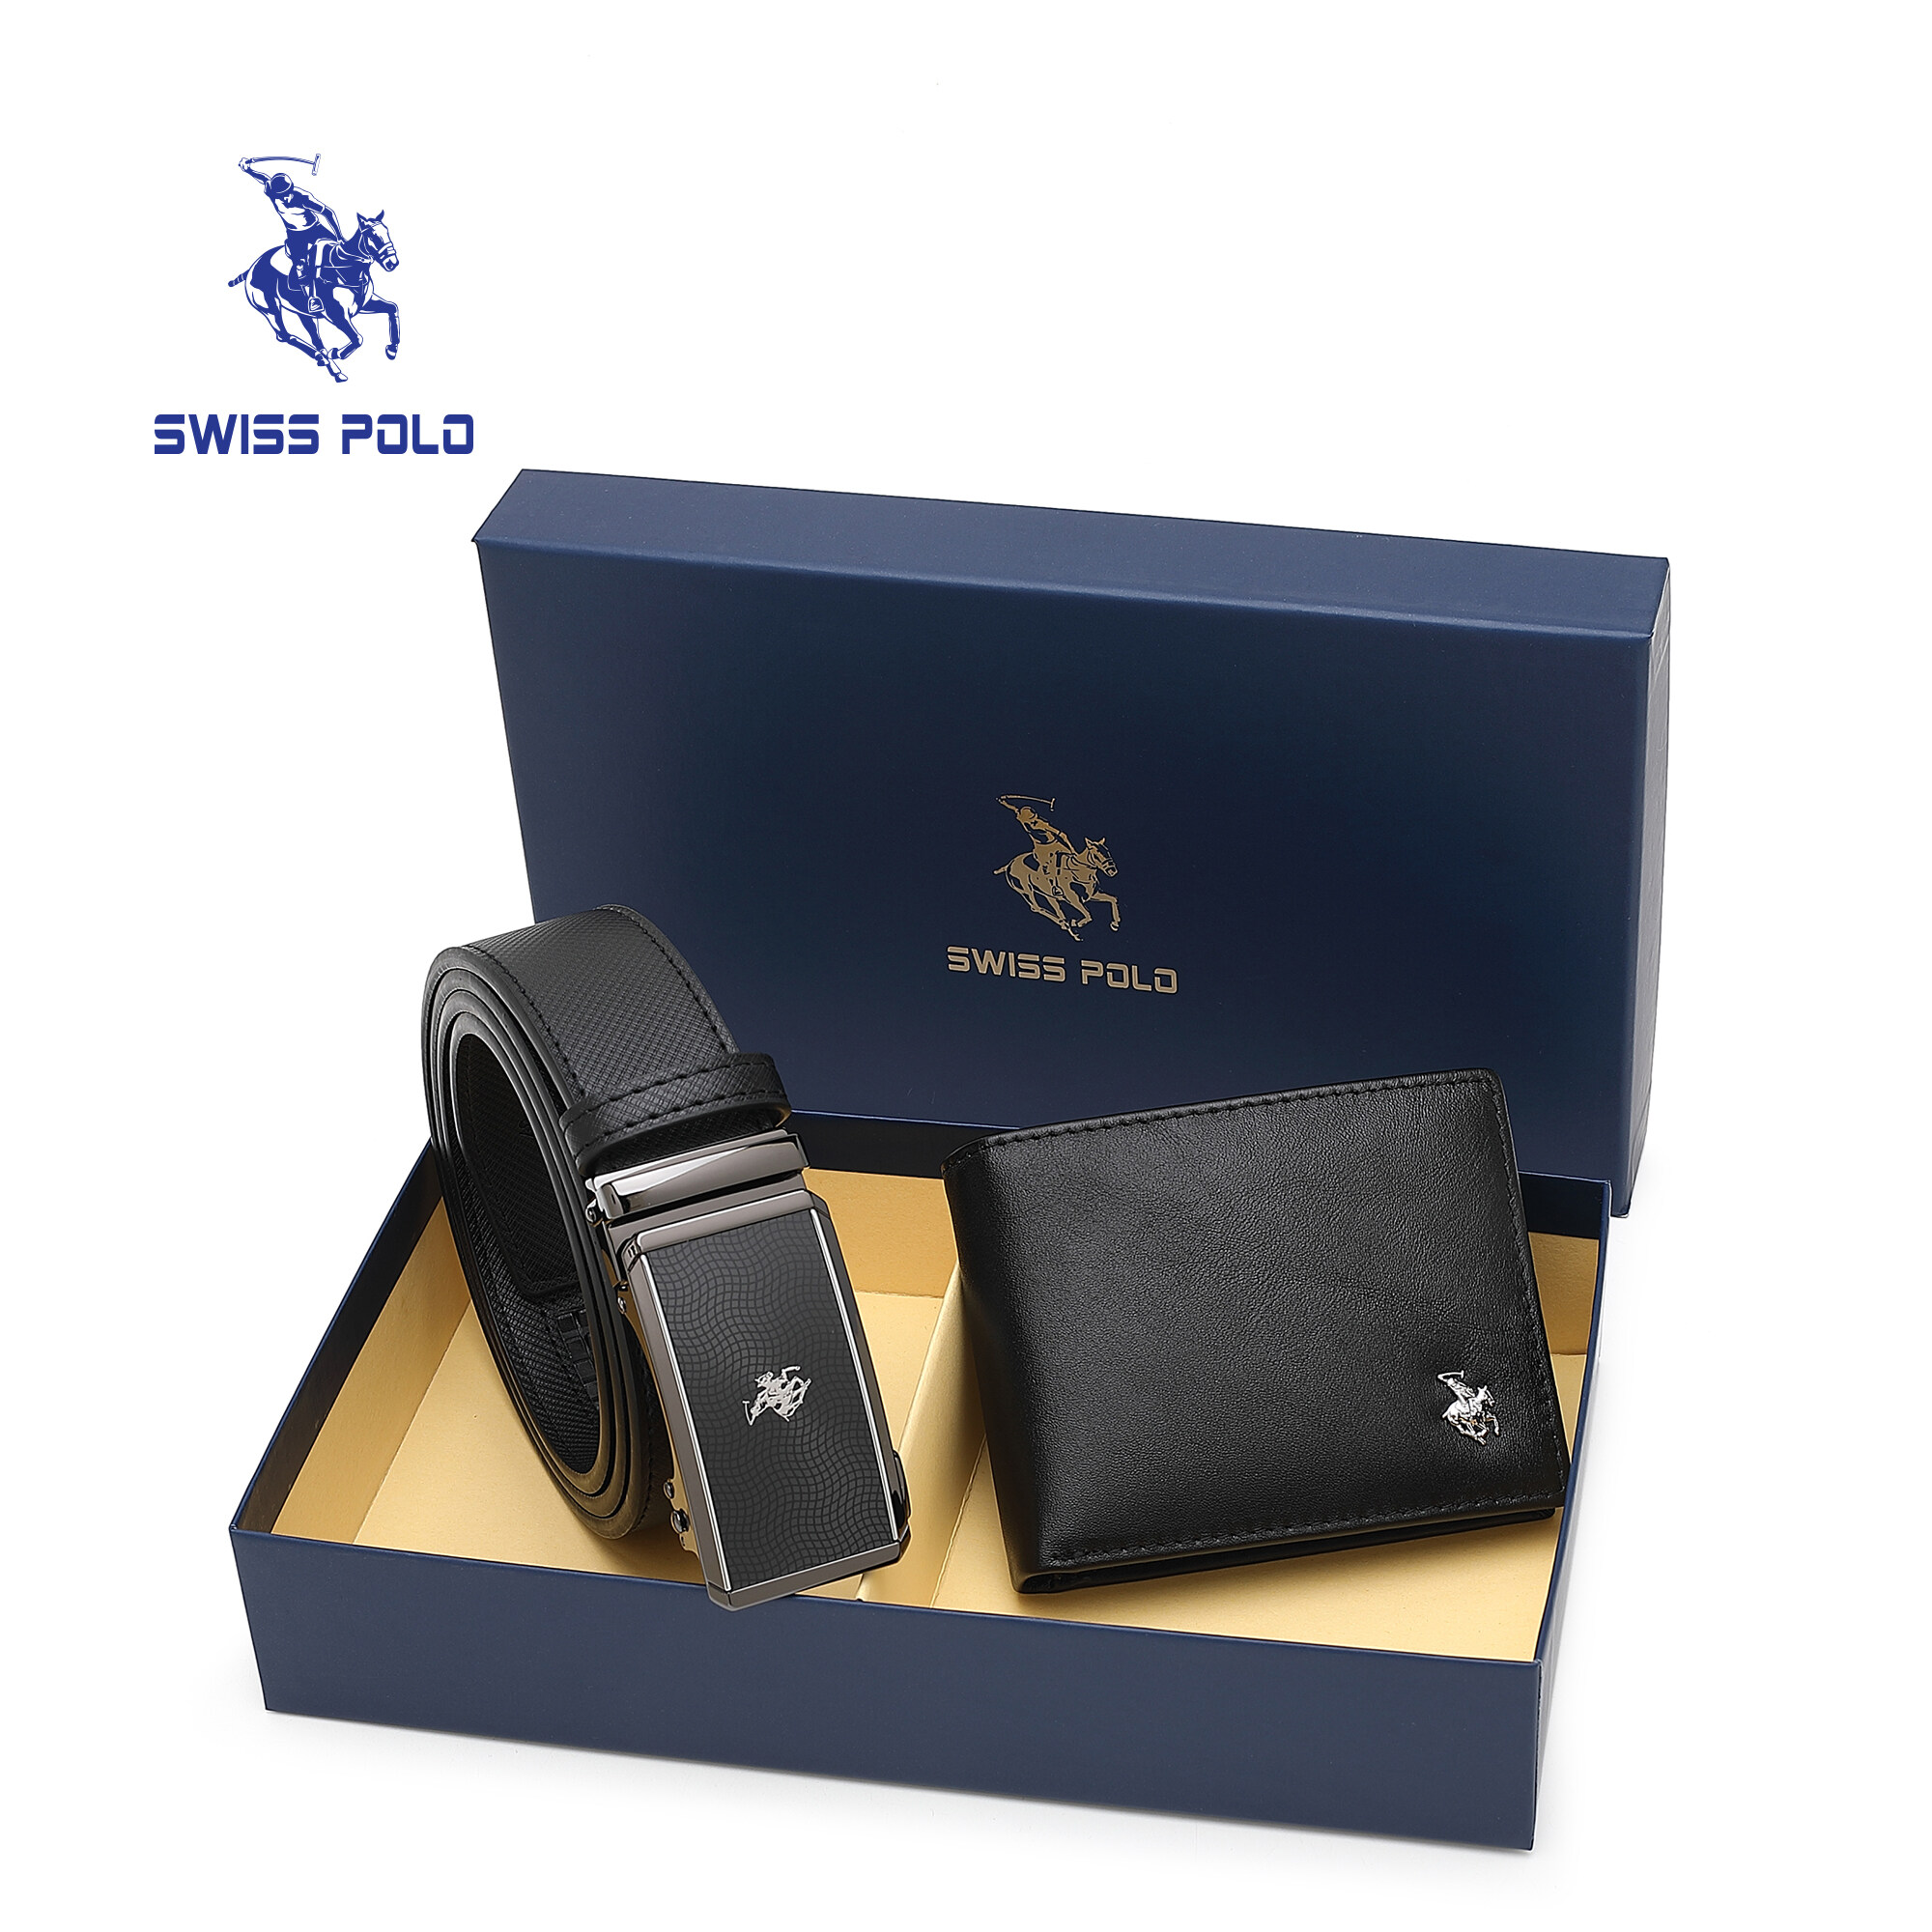 SWISS POLO Gift Set/ Box Wallet With Belt SGS 568-6 BLUE